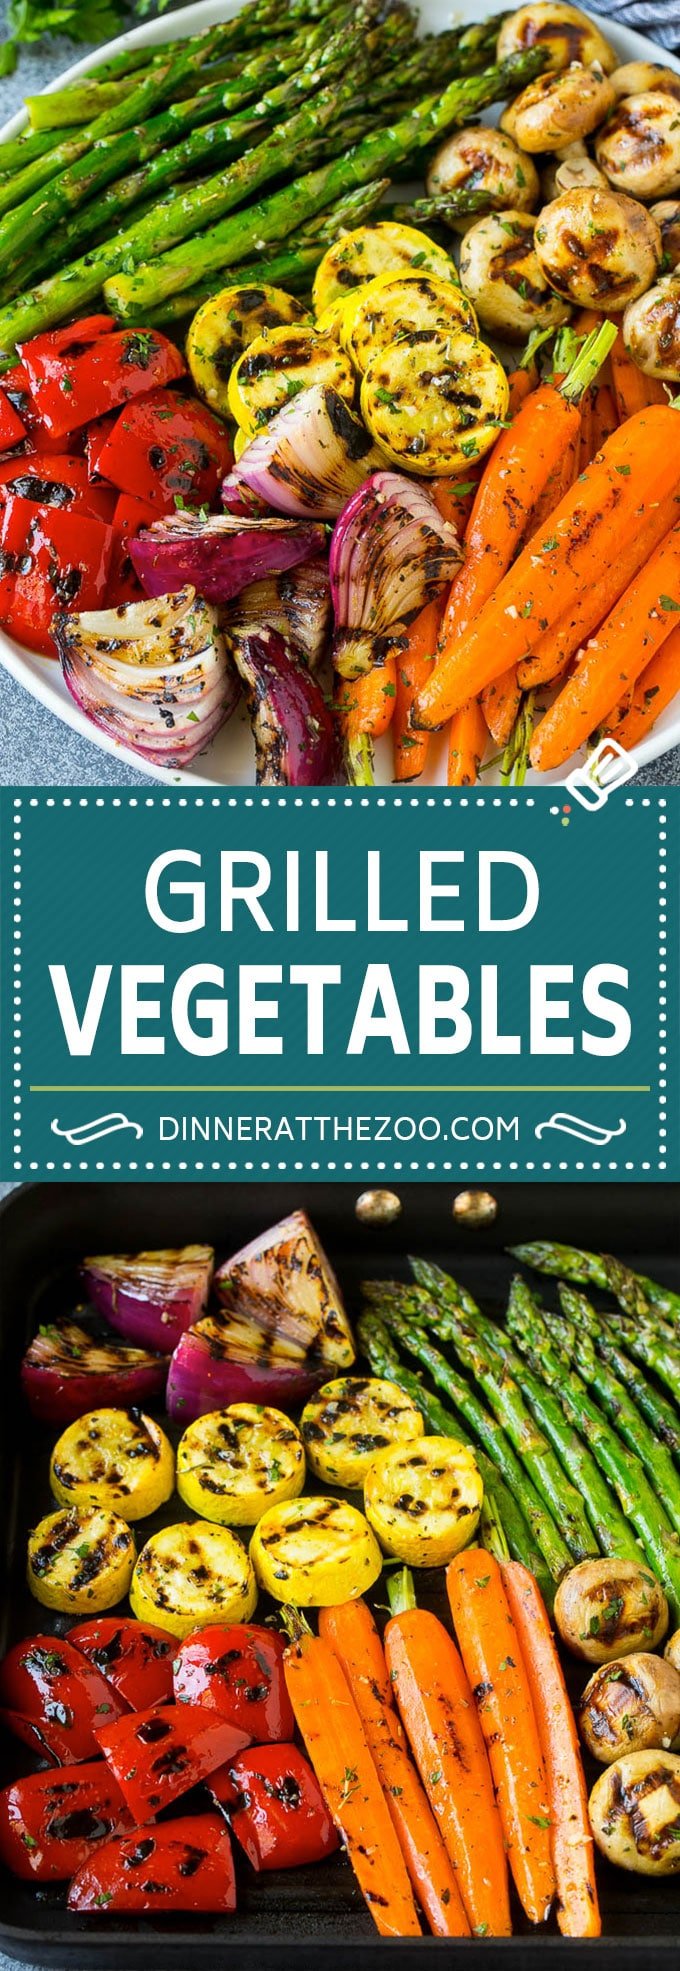 These grilled vegetables are an assortment of colorful veggies bathed in a flavorful garlic and herb marinade, then cooked to perfection on the grill.